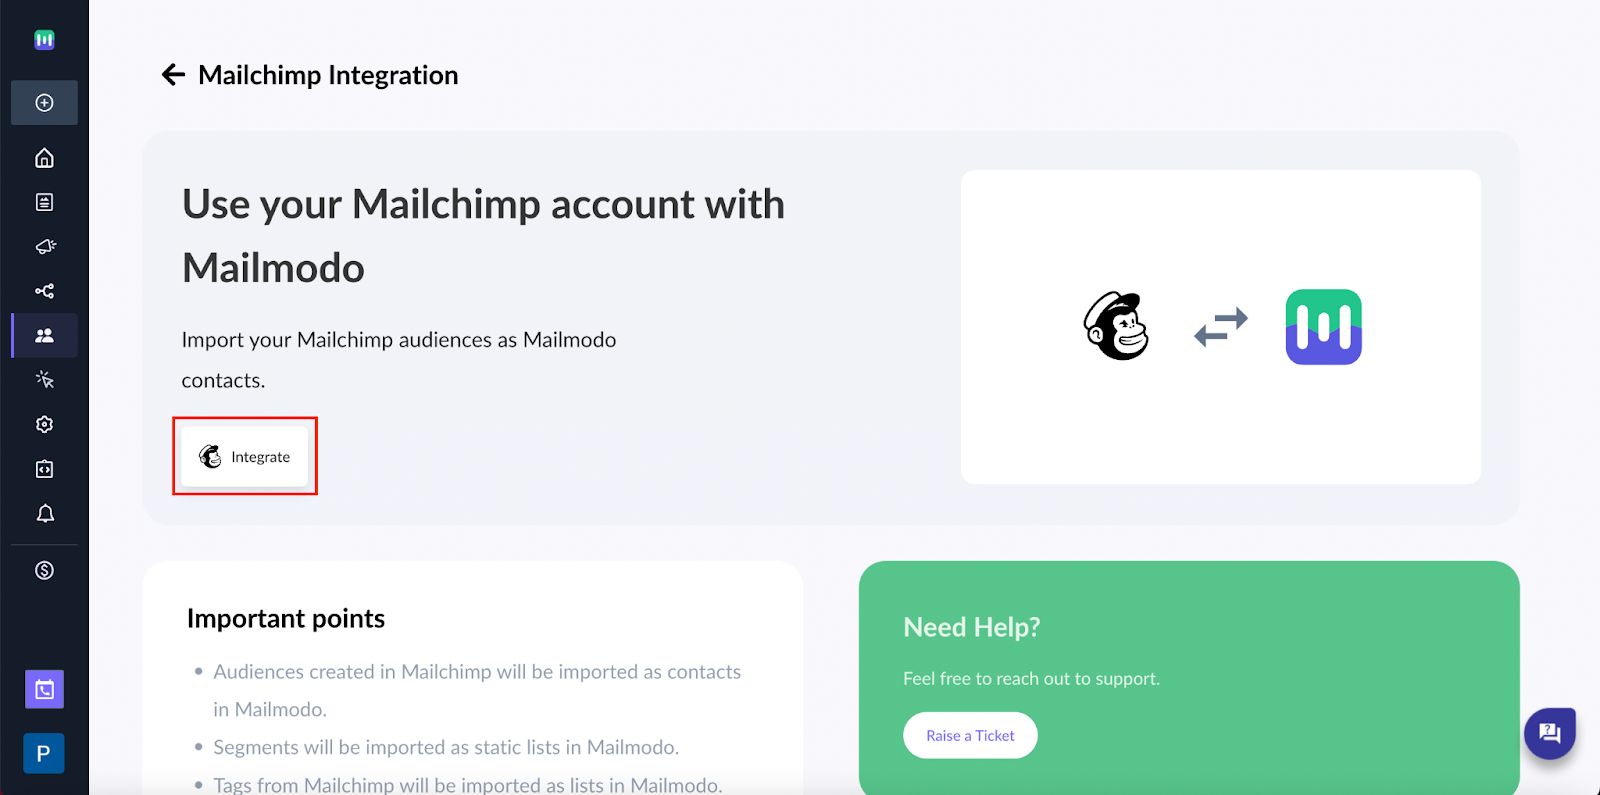 Getting Started with Mailchimp Integration